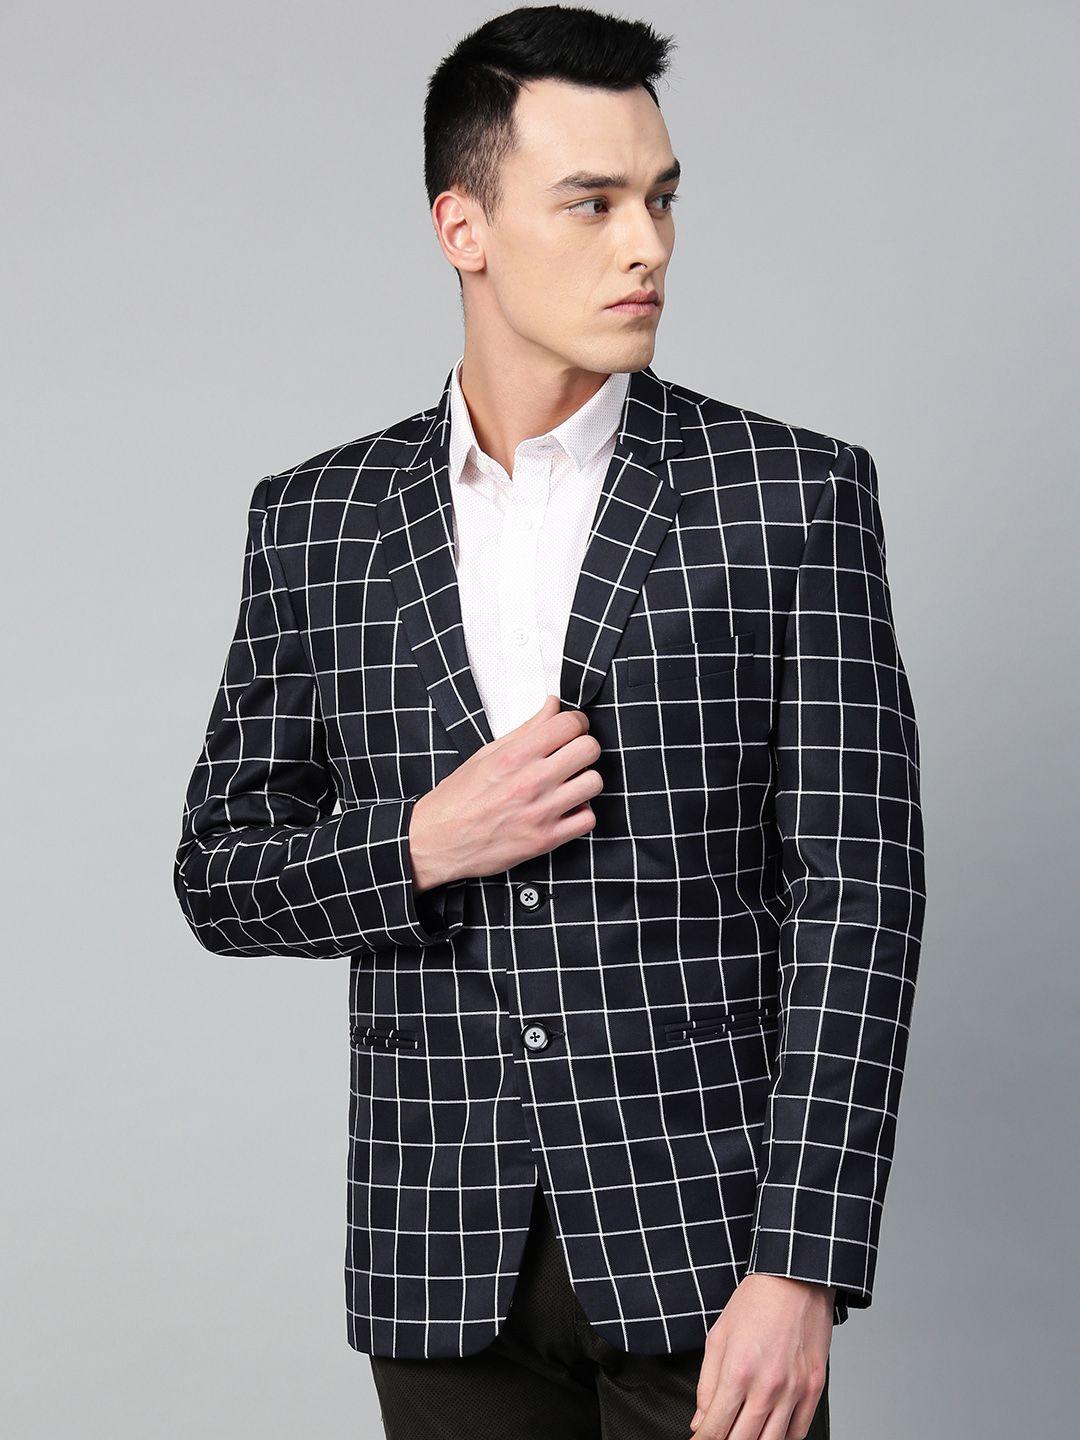 manq men navy blue & white checked slim fit single breasted party blazer